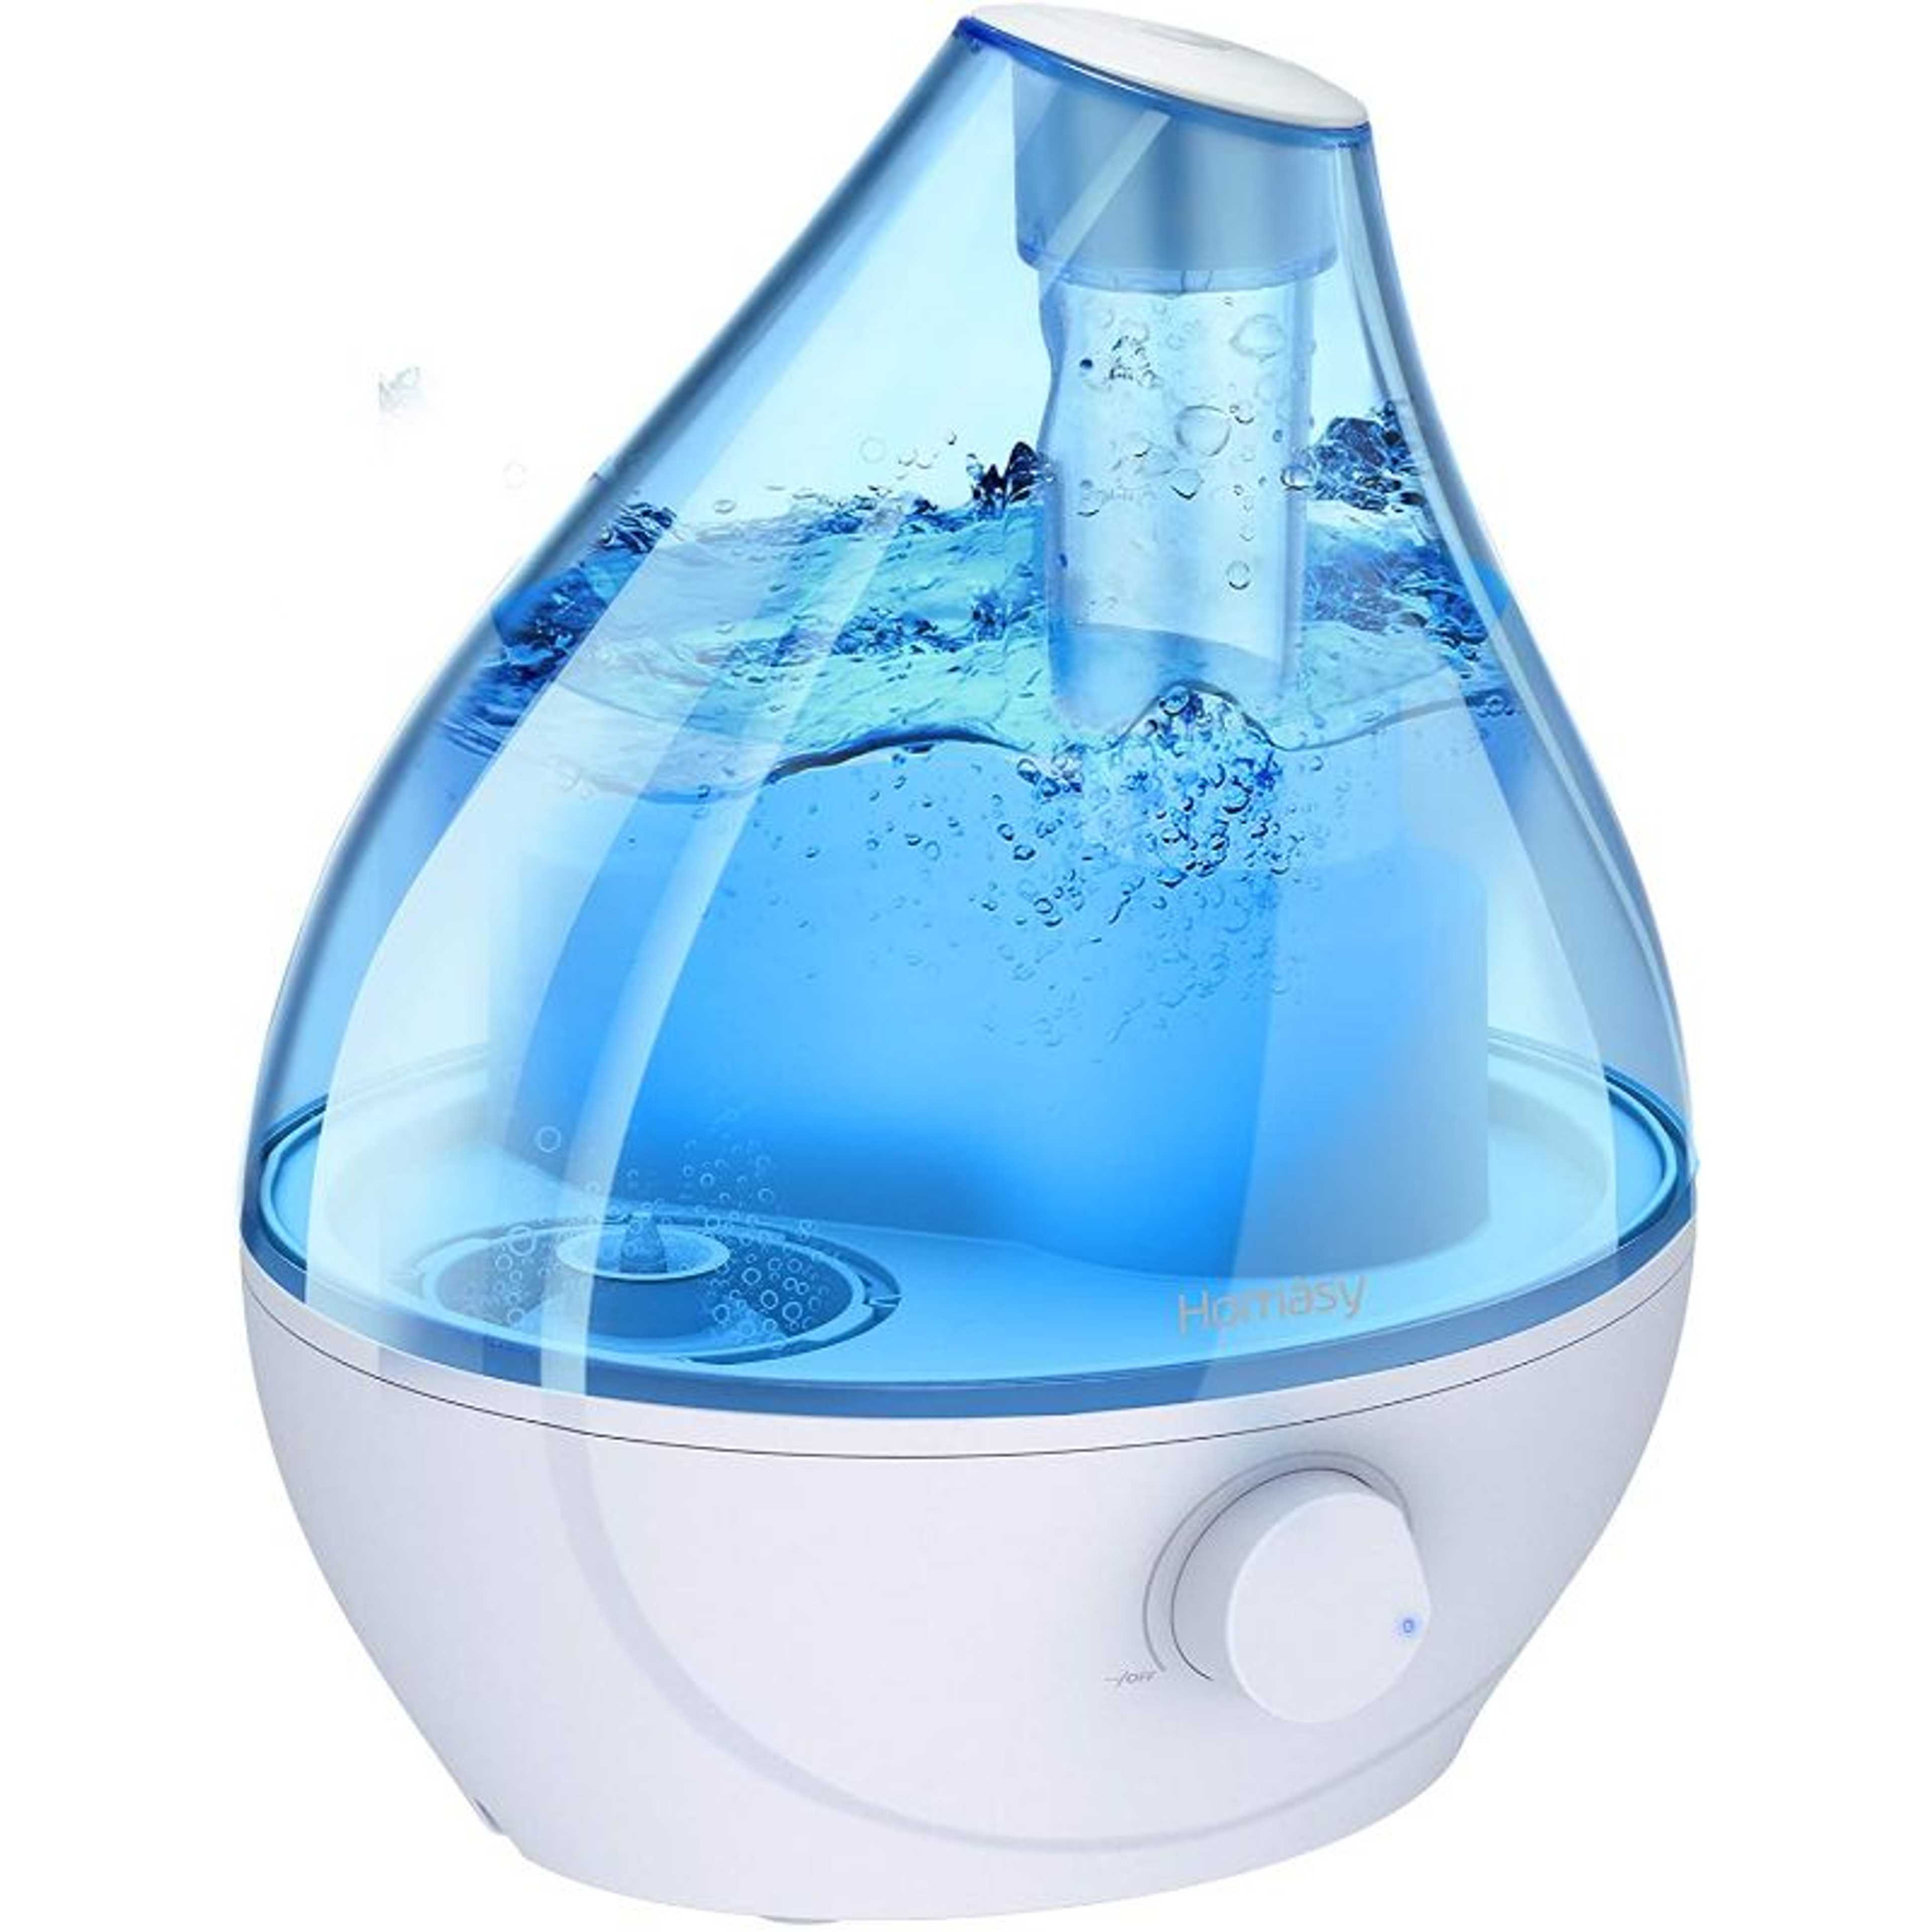 Homasy 1.6L Cool Mist Humidifier, 22dB Whisper-Quiet For Bedroom, Auto Shut-Off, 24H Work Time, BPA-Free Air Humidifier For Plants,Pets,Office, Blue